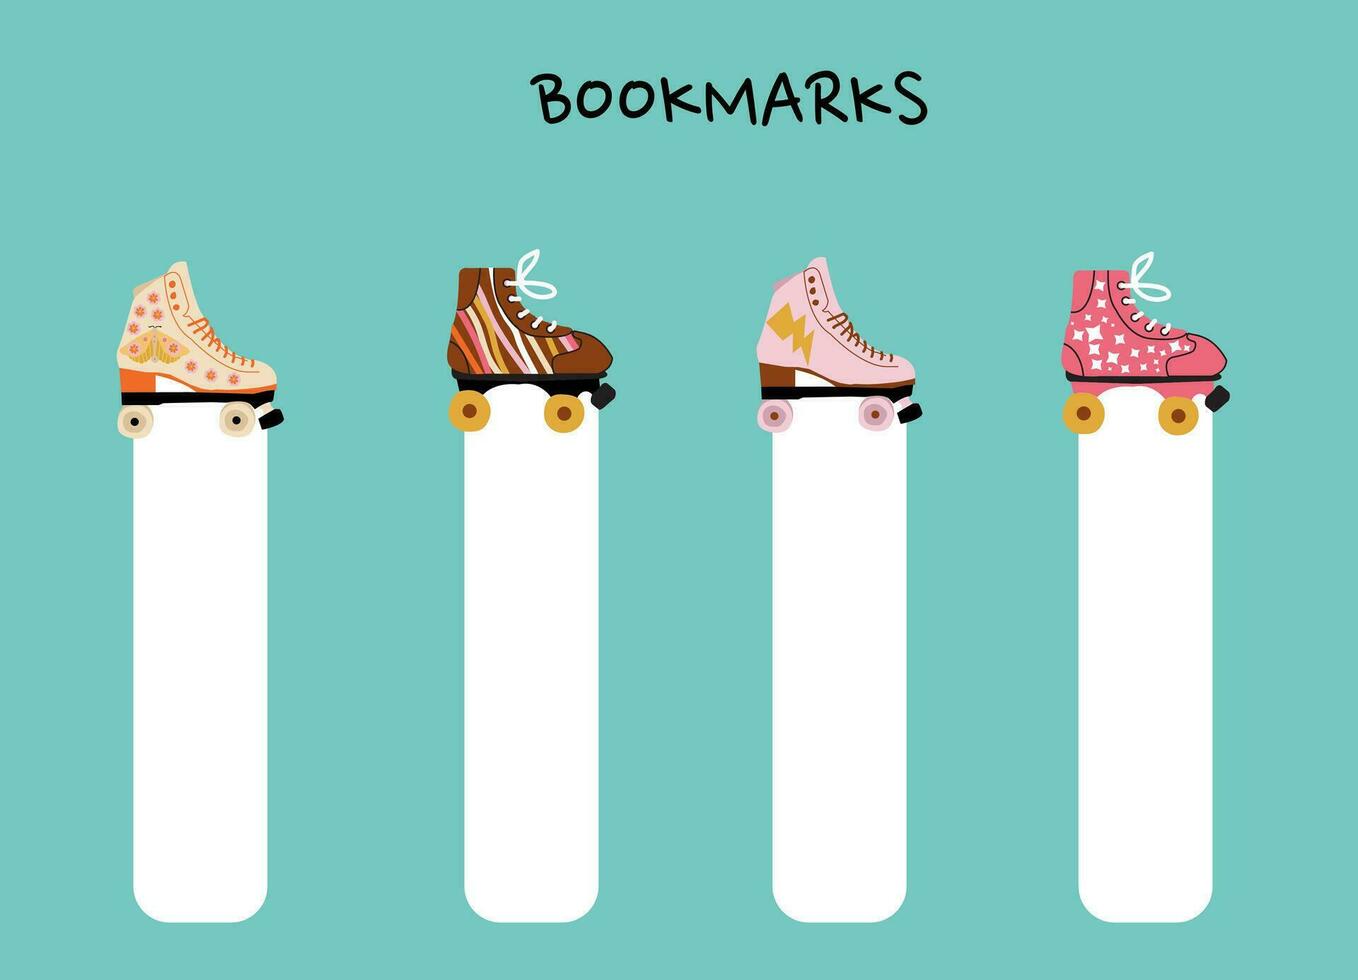 bookmakers for middle school and preschool kids. retro 70s-style roller skates bookmarkers. vector